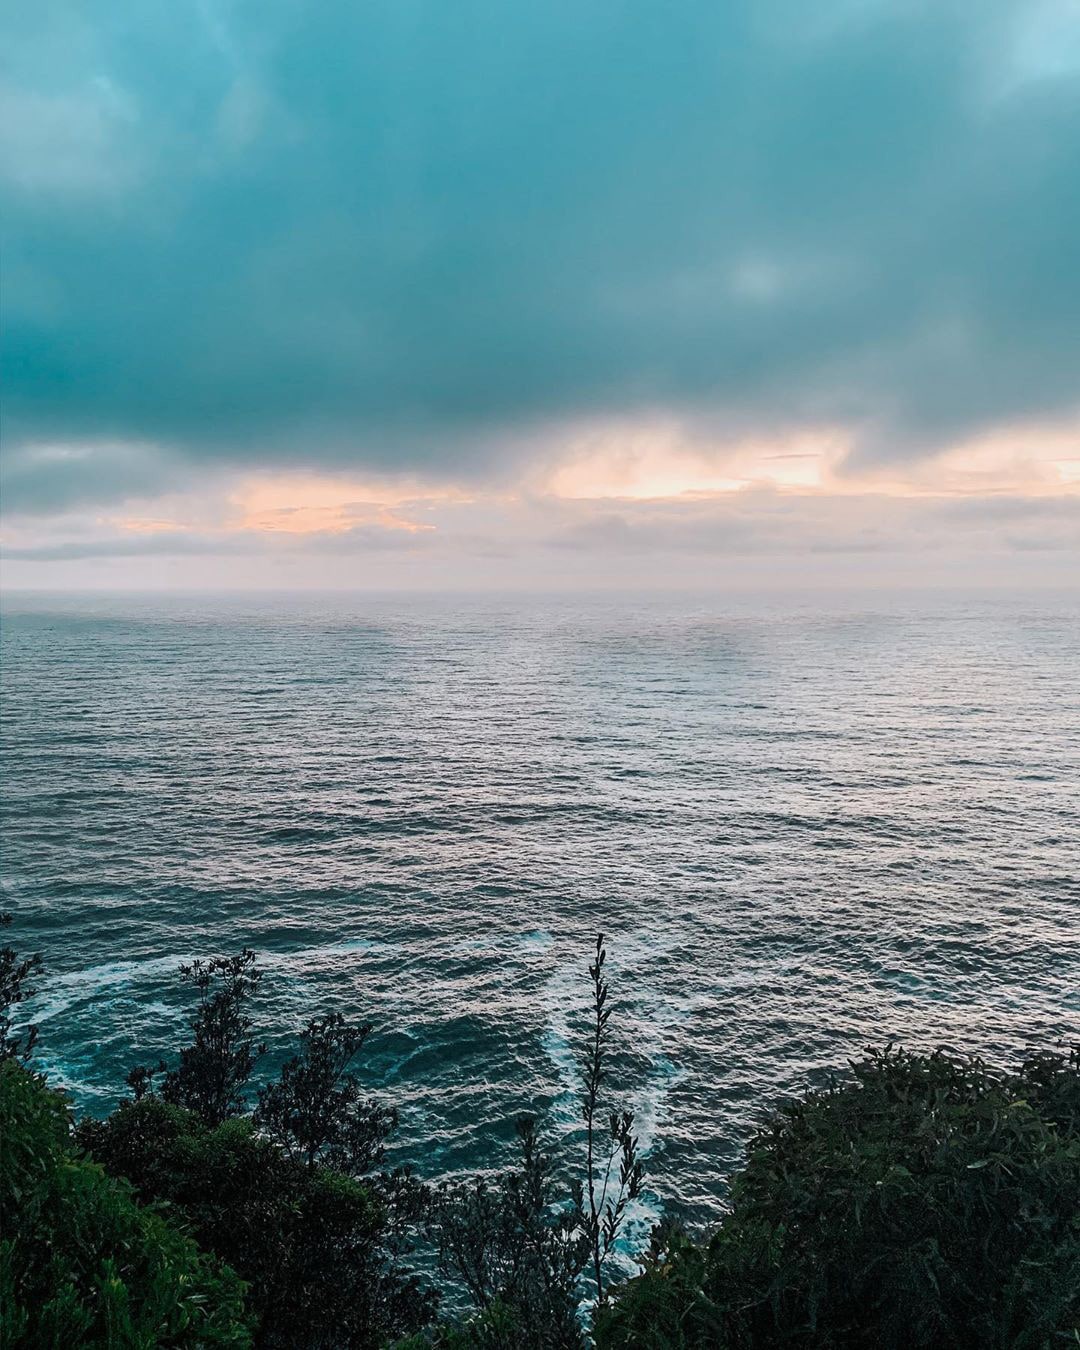 Catch the sunrise at Captain Cook’s lookout.